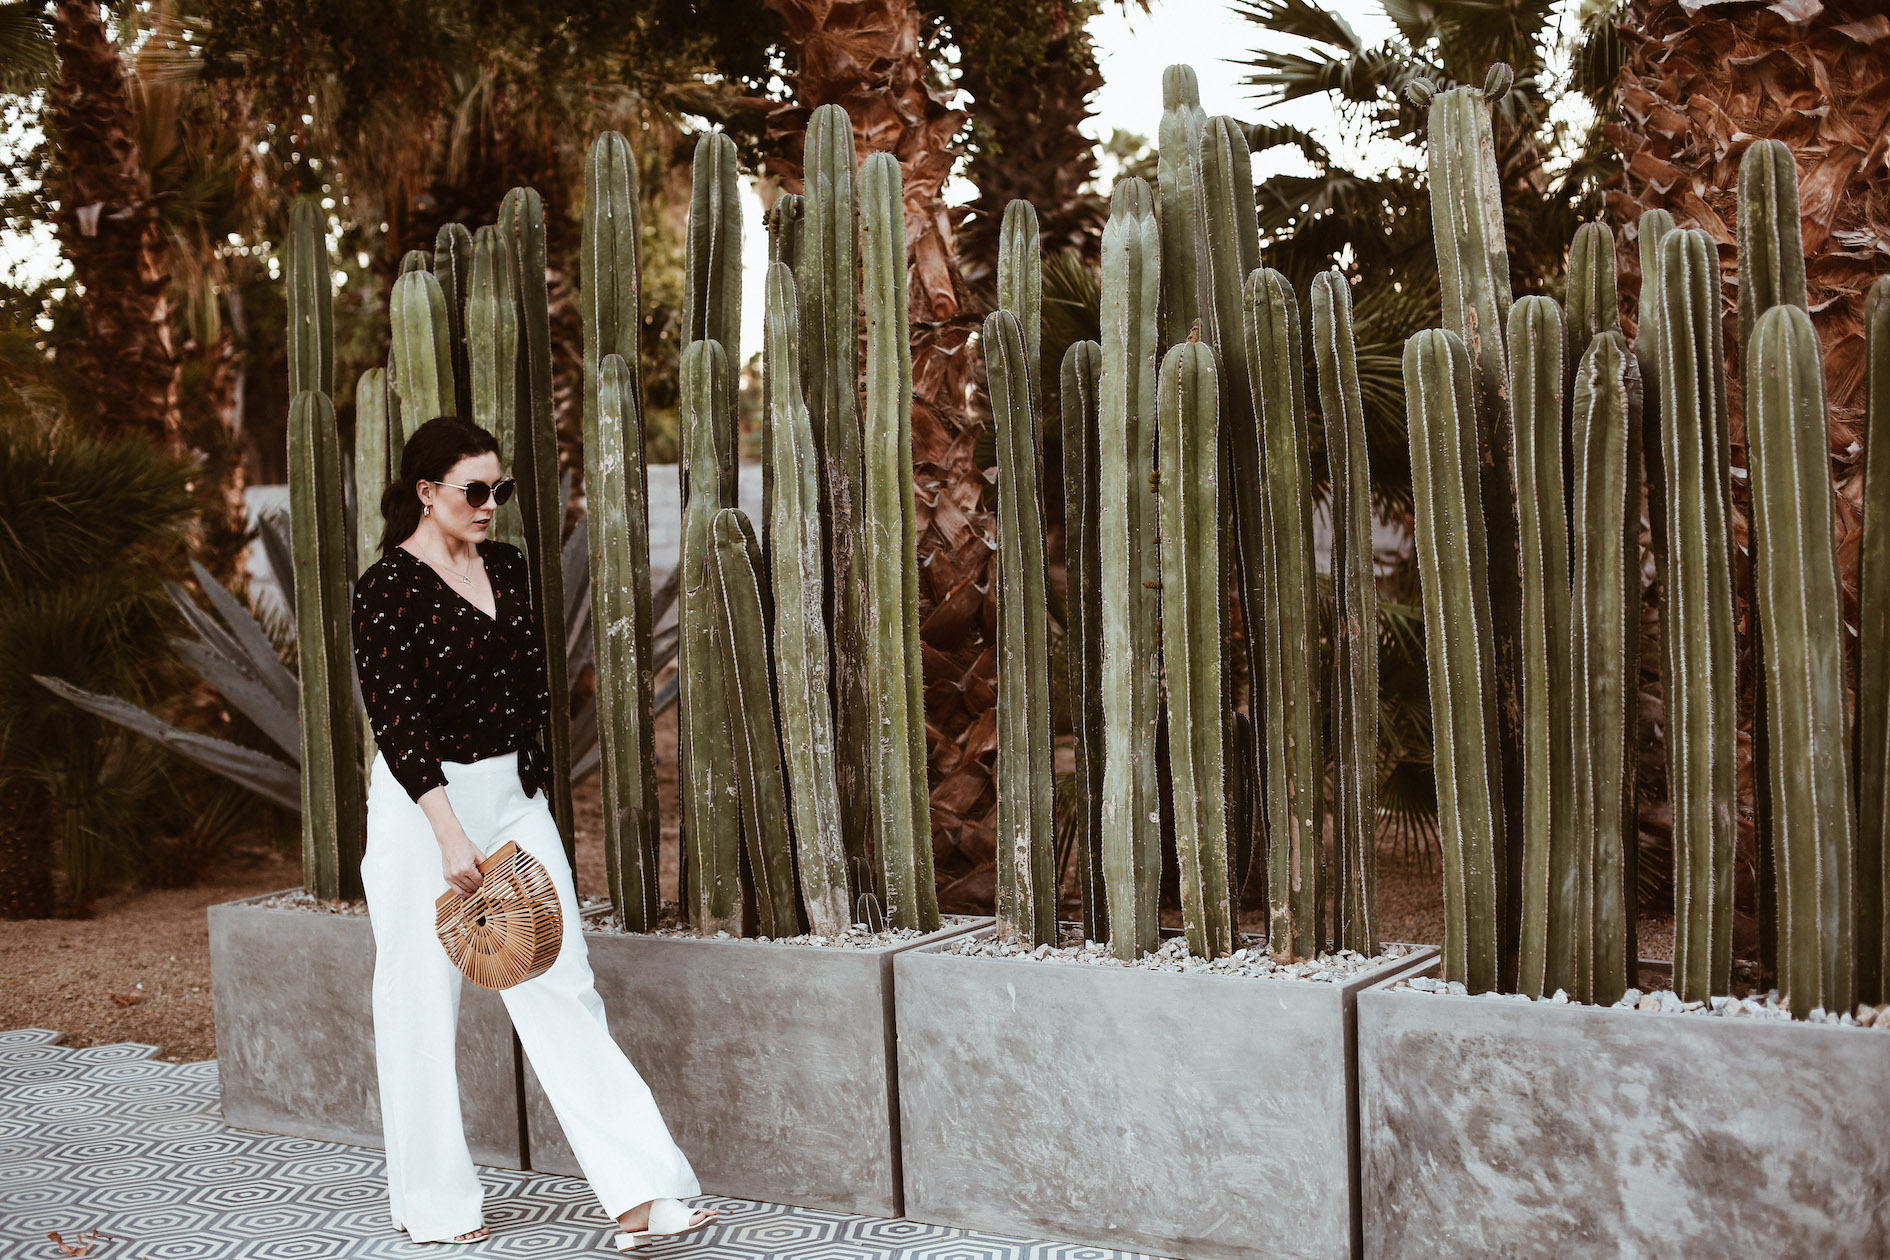 Vacation Style: Wrap Top + White Pants